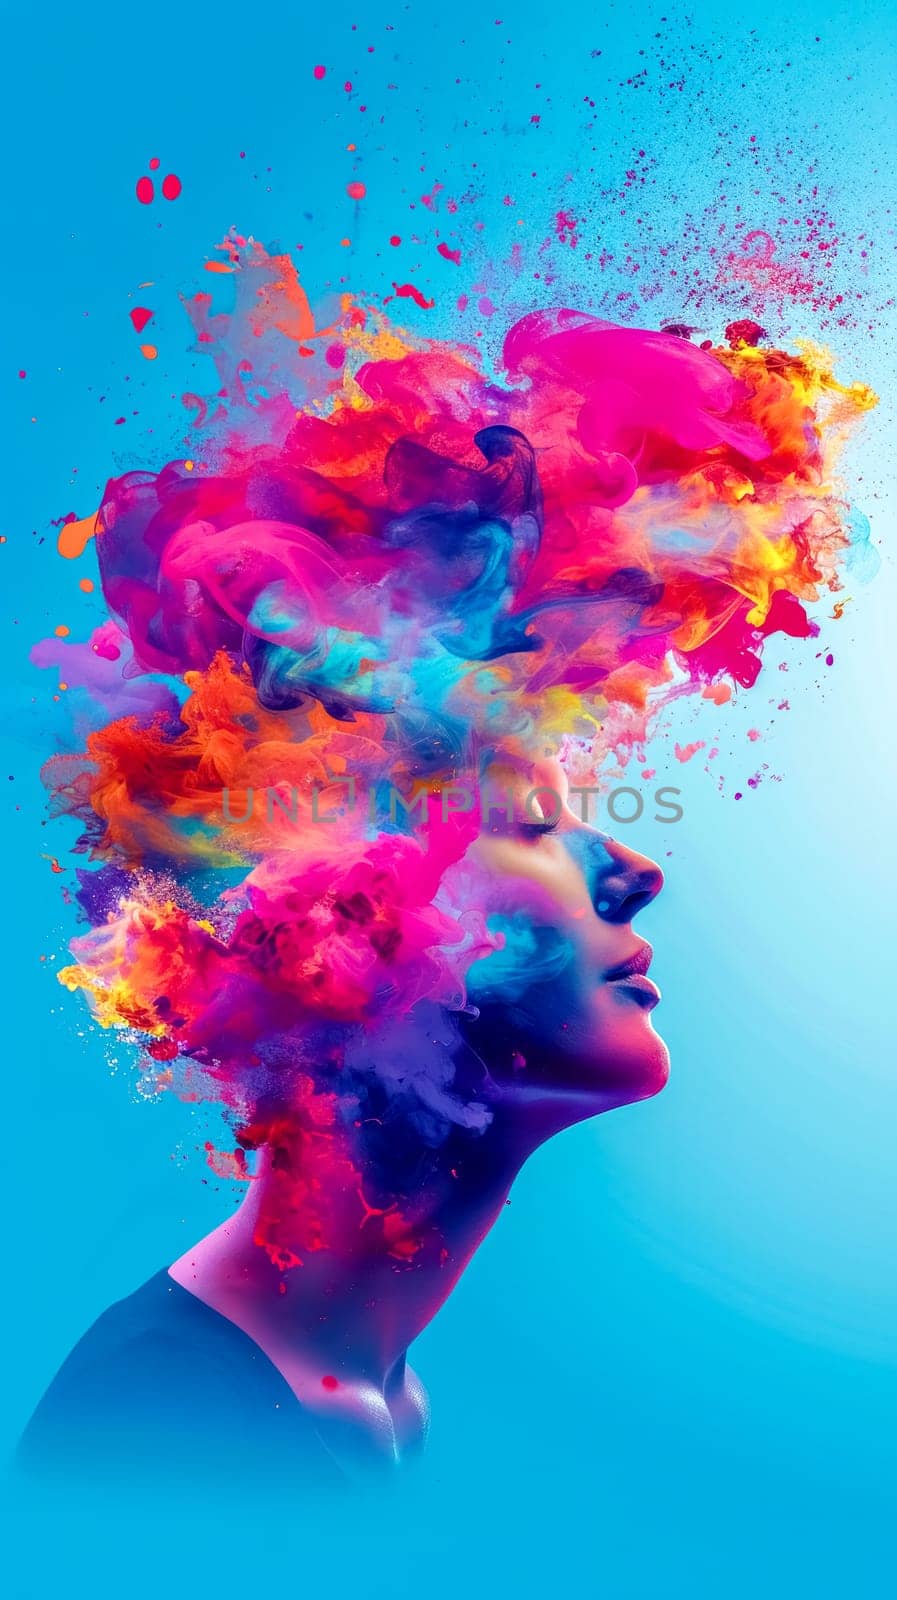 woman's profile with her head transforming into a vibrant explosion of colors and paint splatters, symbolizing creativity, imagination, and the unleashing of ideas or the freeing of the mind by Edophoto